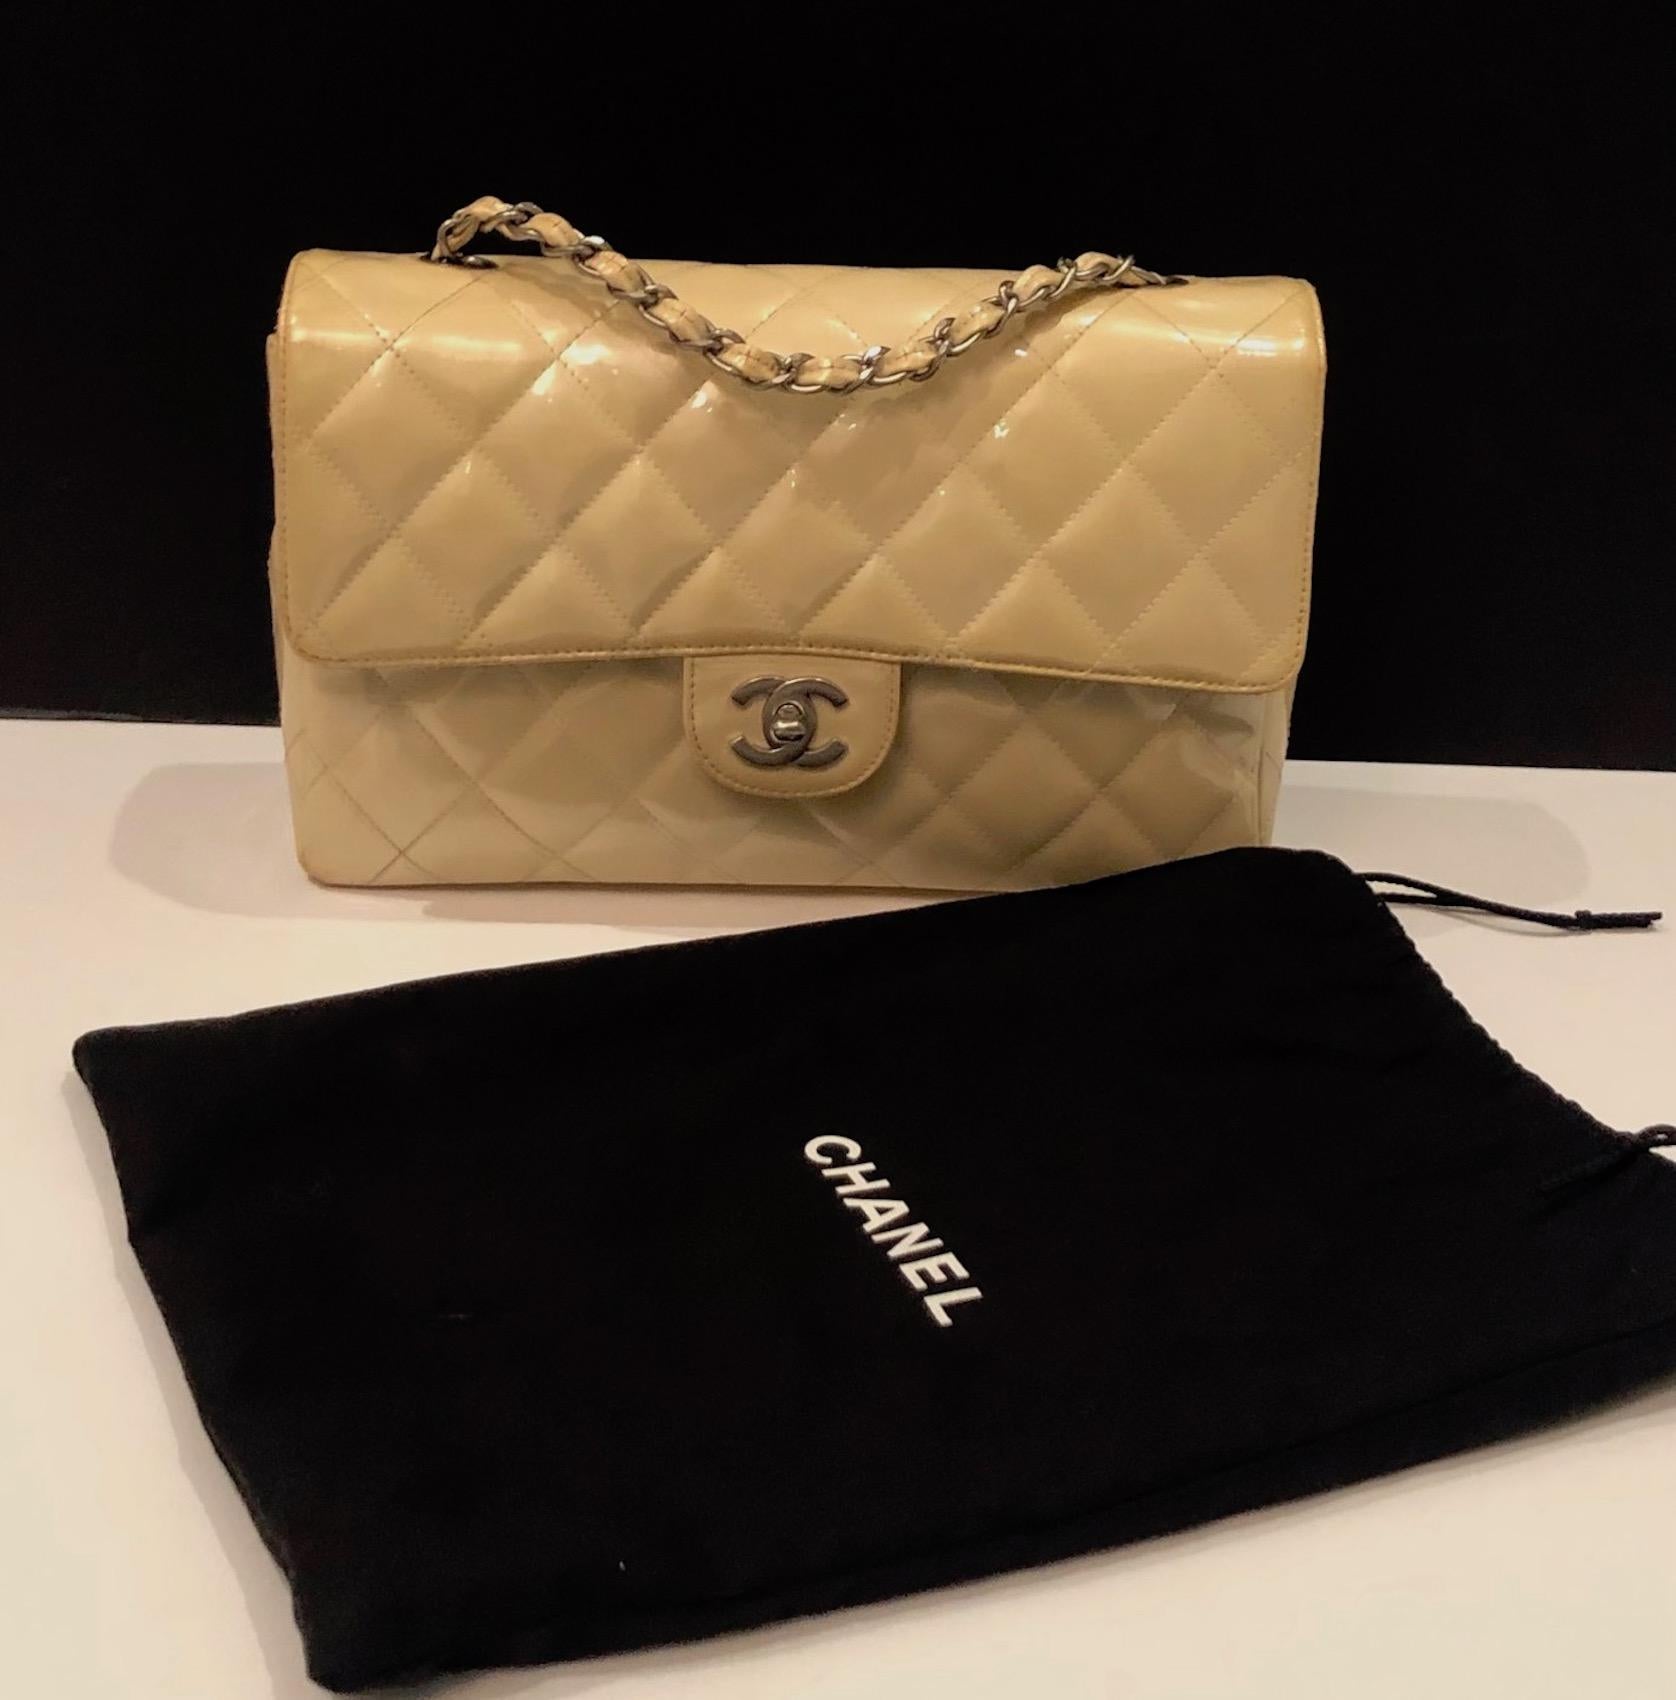 CHANEL Timeless 2.55 Flap Bag Patent Leather Cream Circa 2000
This new millenium 2000 Chanel 25 classic timeless single flap bag is handcrafted from patent leather in cream colour with mat chrome hardware stamped Chanel. CC turn lock with a half